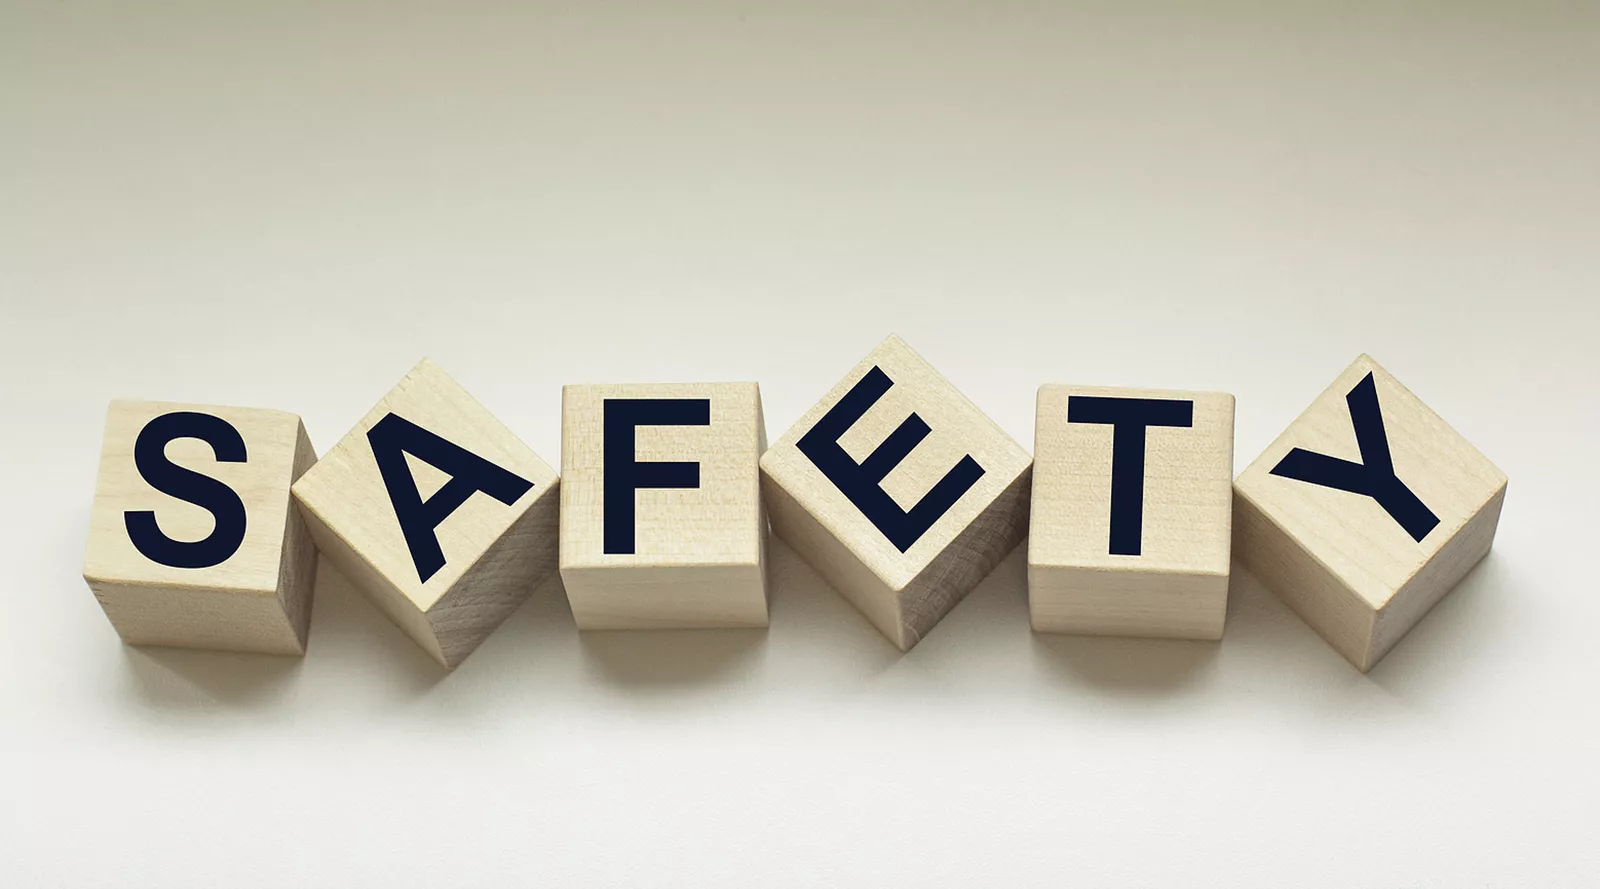 11 Simple Health and Safety Ideas Safety Kee Safety to Campaigns - Improve Workplace